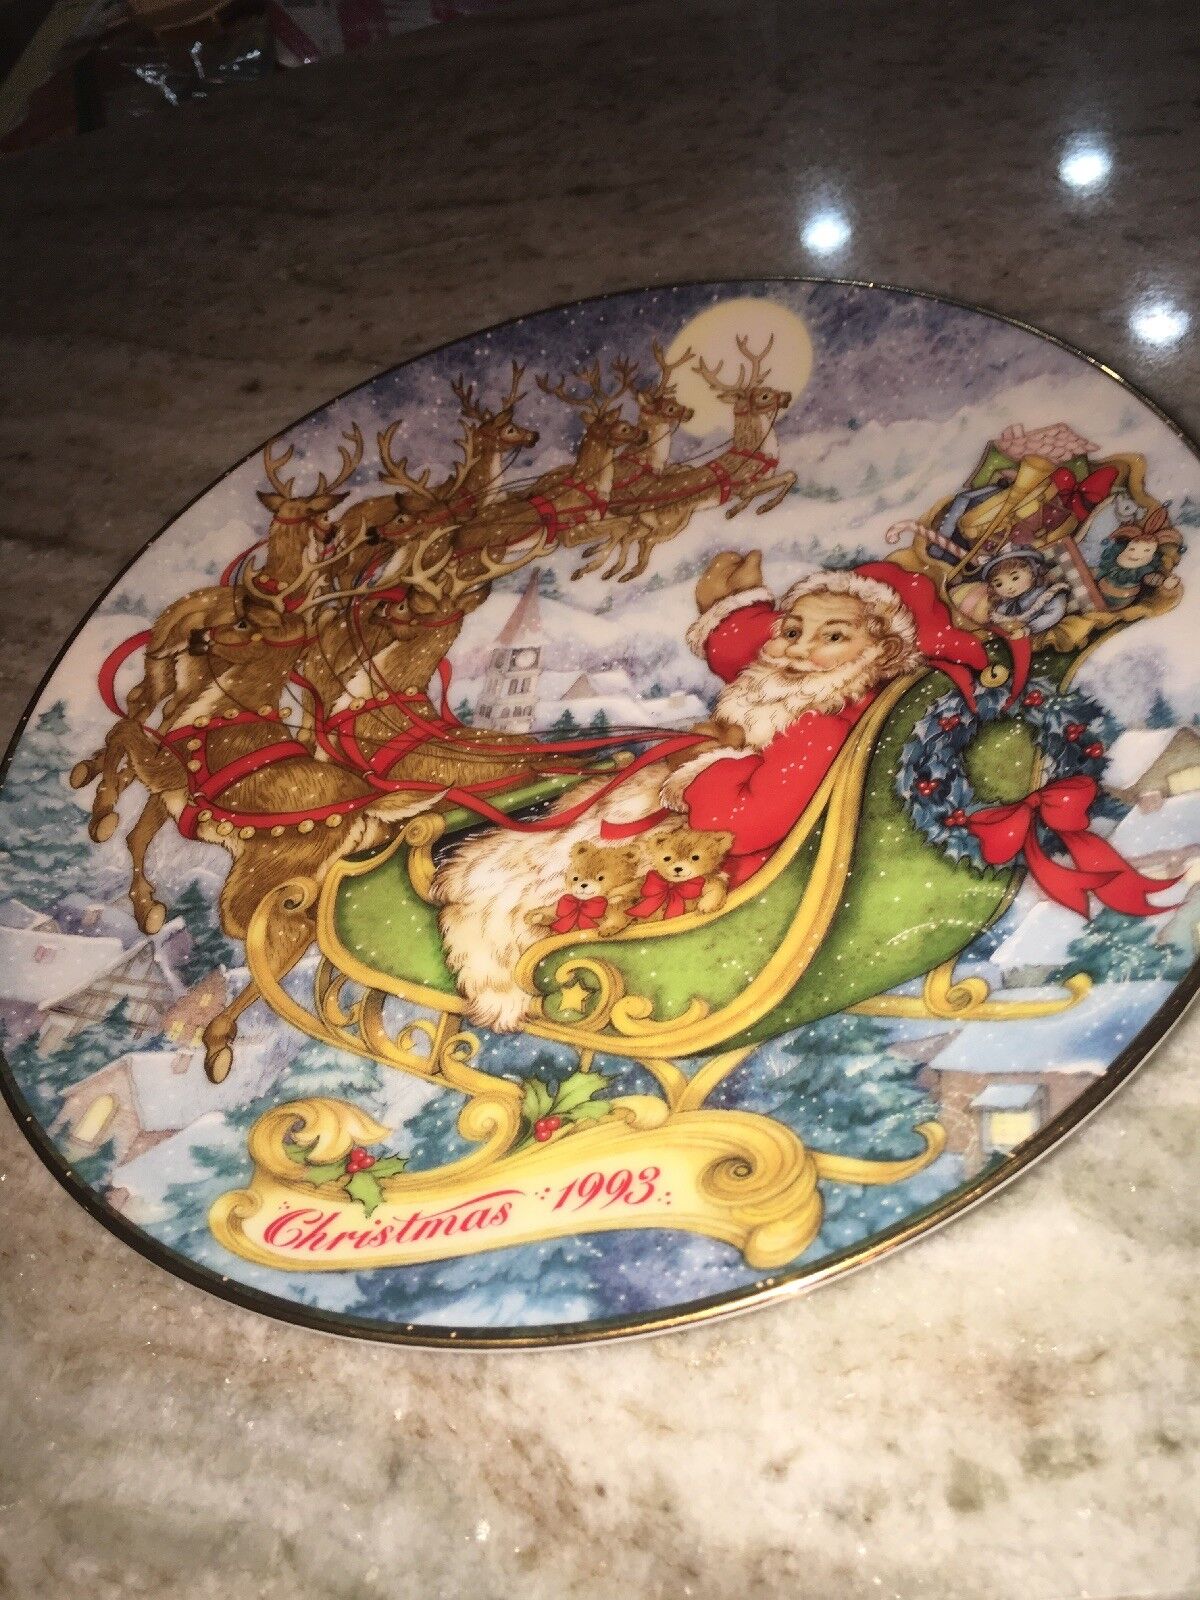 Avon special Christmas Delivery 1993 Plate Santa Clause-SHIPS N 24 HRS